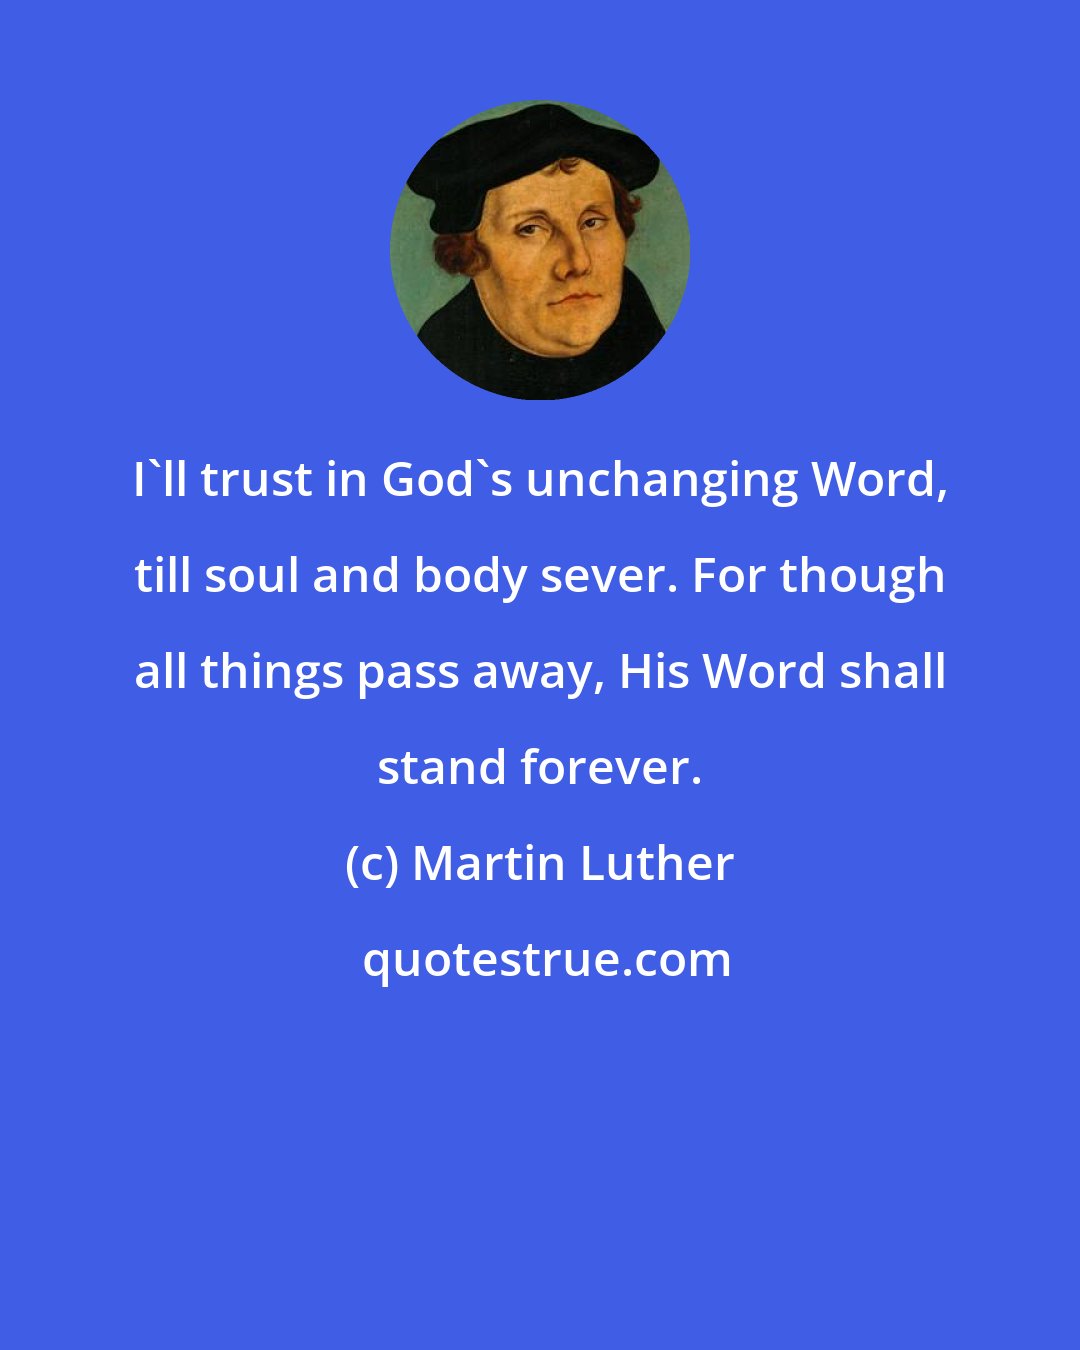 Martin Luther: I'll trust in God's unchanging Word, till soul and body sever. For though all things pass away, His Word shall stand forever.